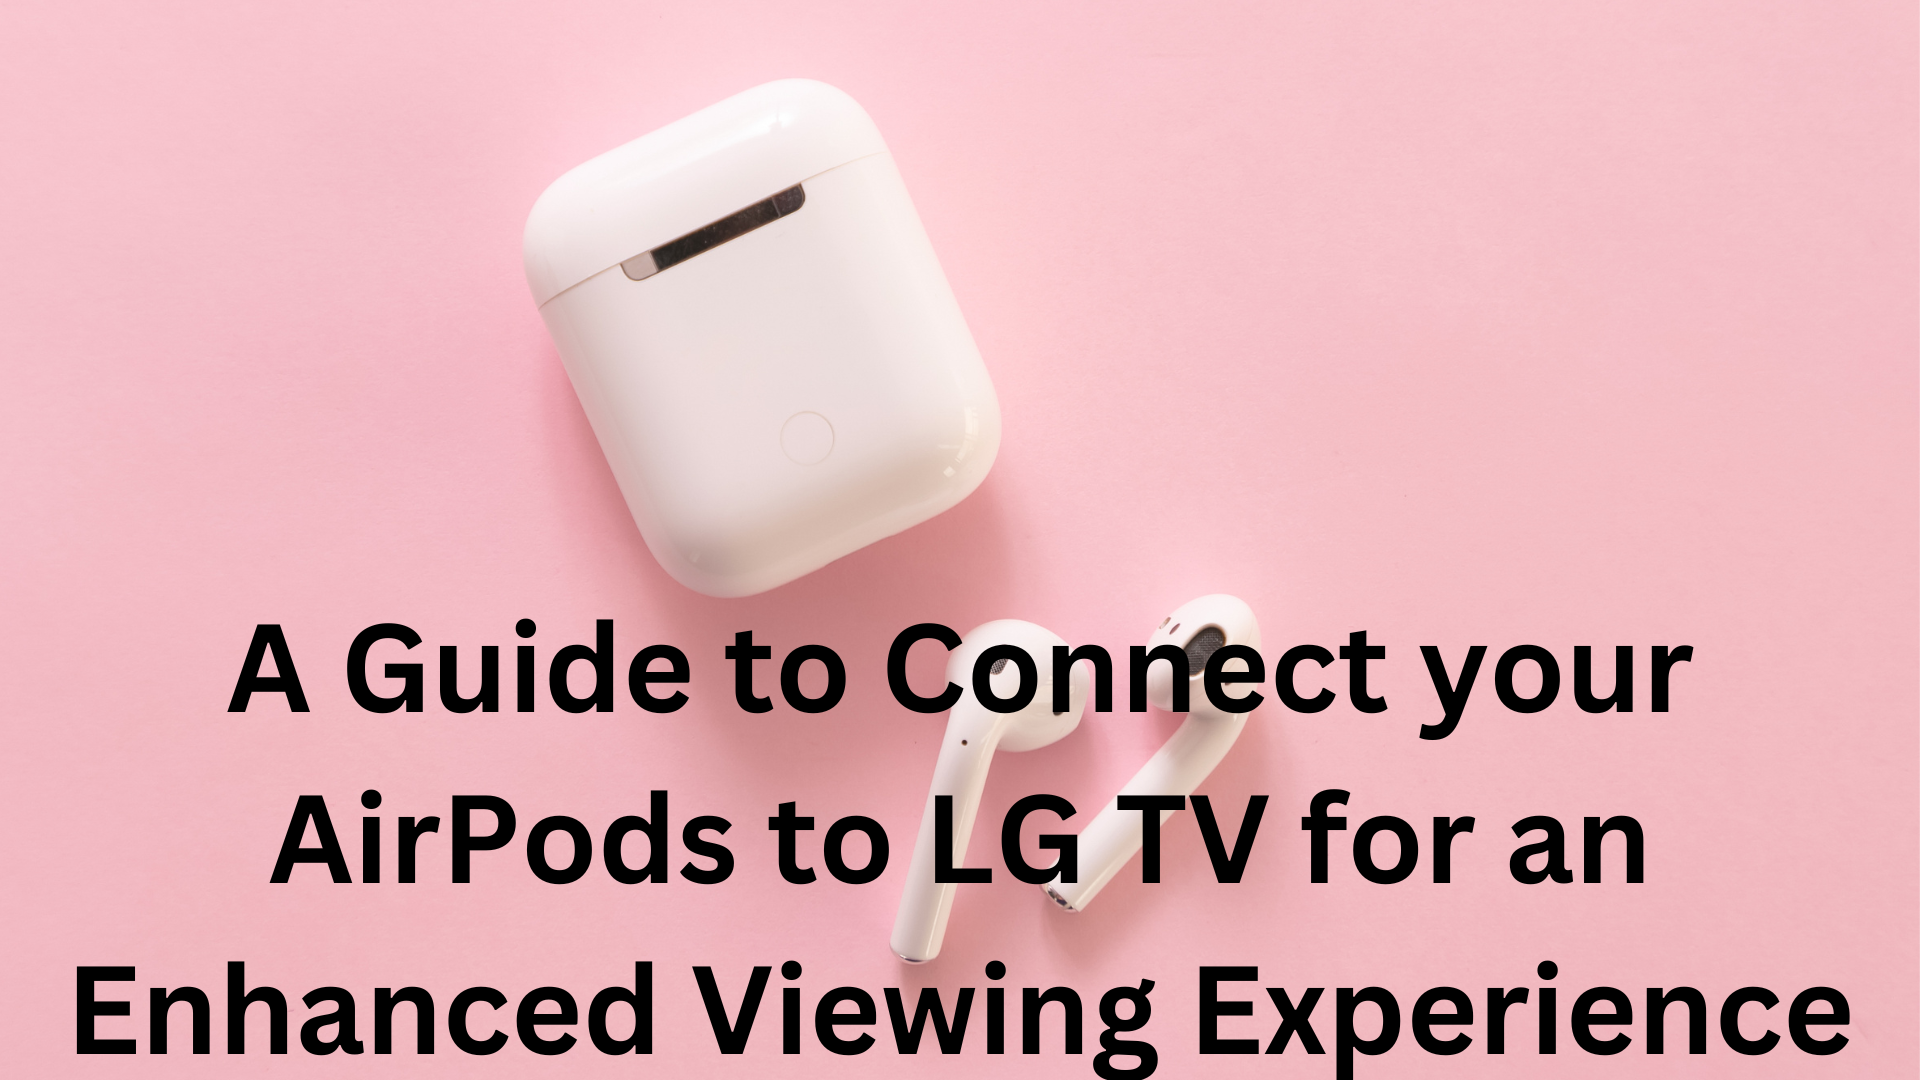 Connect AirPods to LG TV for Enhanced Viewing